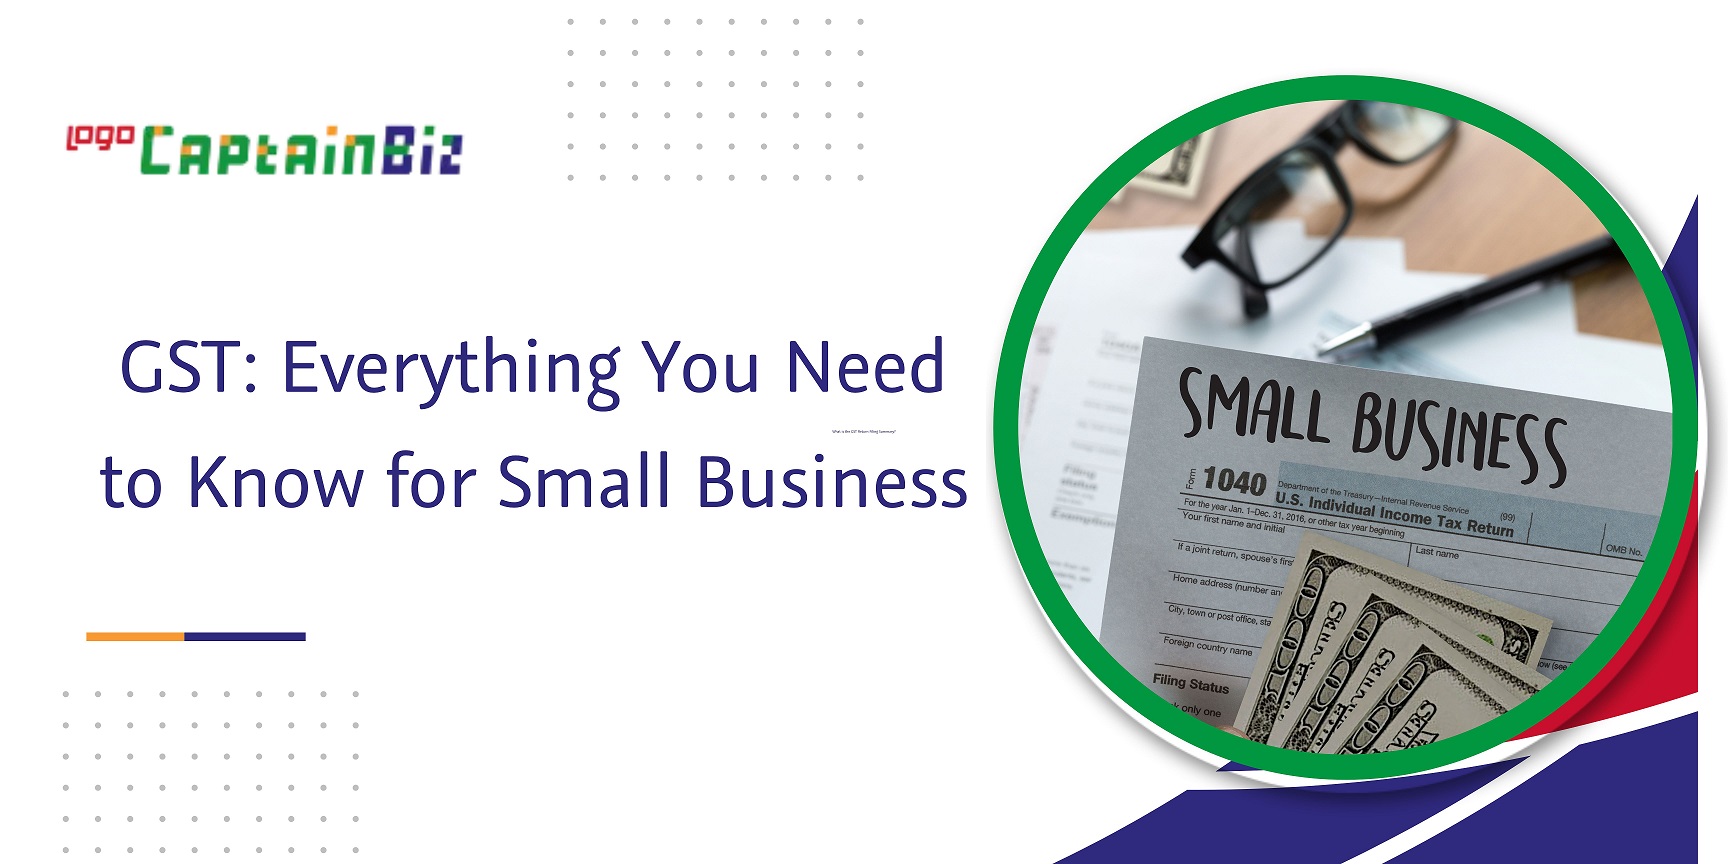 CaptainBiz: gst everything you need to know for small business